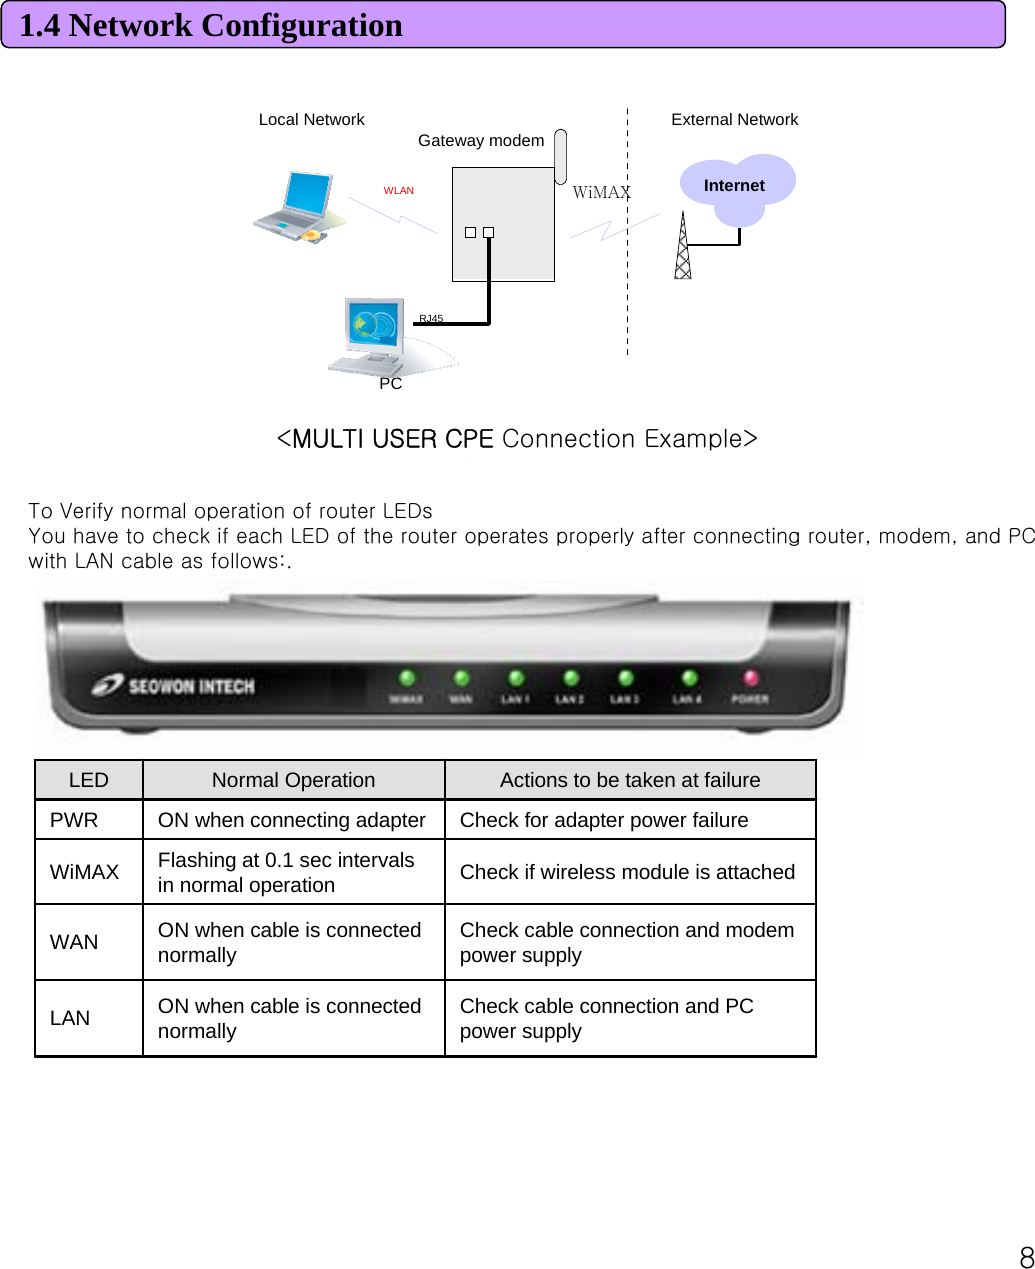 81.4 Network ConfigurationPCGateway modemRJ45InternetWLANLocal Network External NetworkWiMAX&lt;MULTI USER CPE Connection Example&gt; Check cable connection and PC power supplyON when cable is connected normallyLAN Check cable connection and modem power supplyON when cable is connected normallyWAN Check if wireless module is attachedFlashing at 0.1 sec intervals in normal operationWiMAXCheck for adapter power failureON when connecting adapterPWR Actions to be taken at failureNormal OperationLEDSEOWONINTECHTo Verify normal operation of router LEDsYou have to check if each LED of the router operates properly after connecting router, modem, and PC with LAN cable as follows:. 